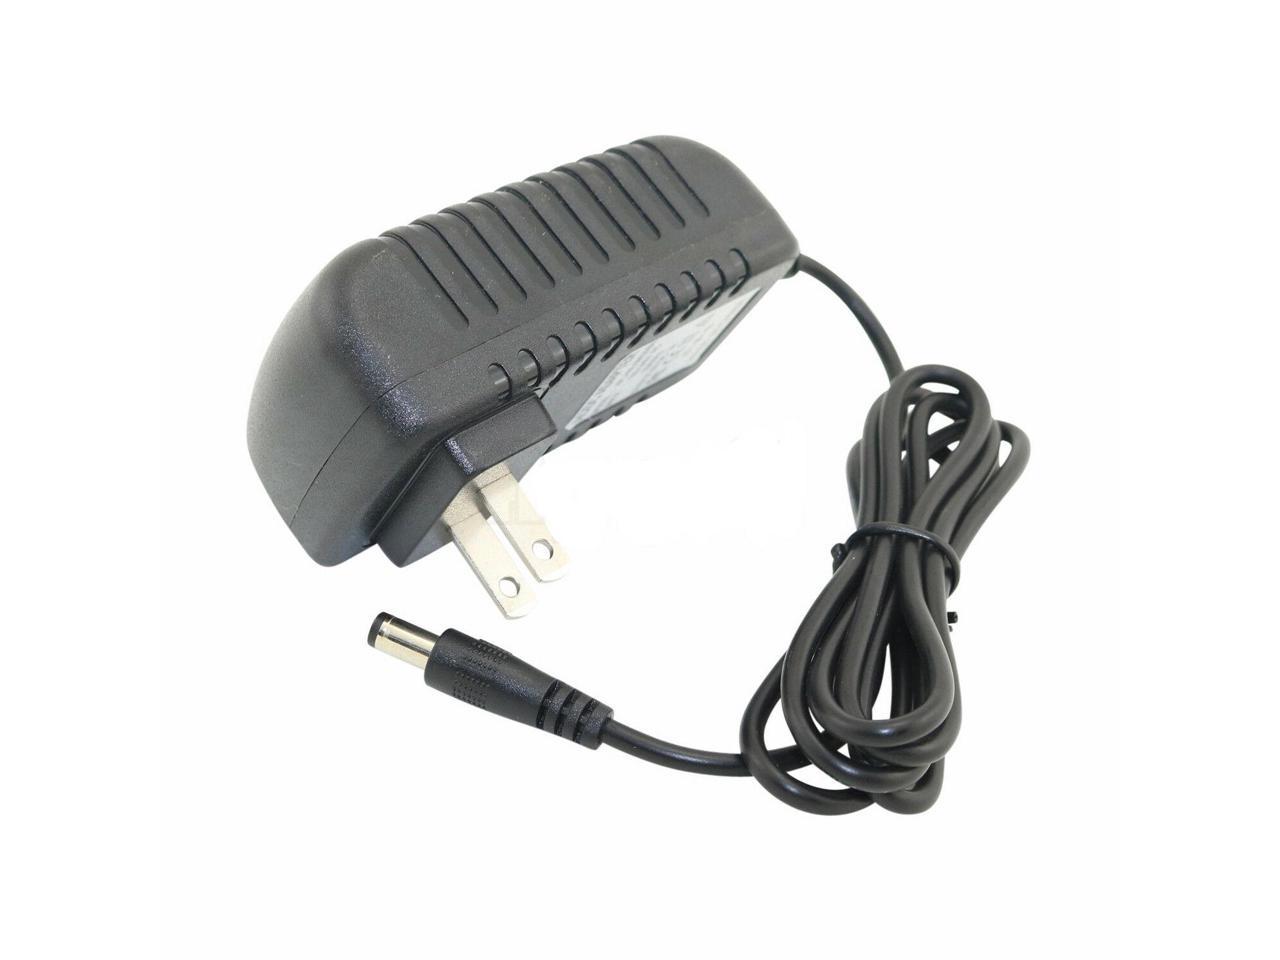 12V AC Power adapter for Yamaha PSS-30 PSR-12 PSS-570 Keyboard Power Supply Cord 